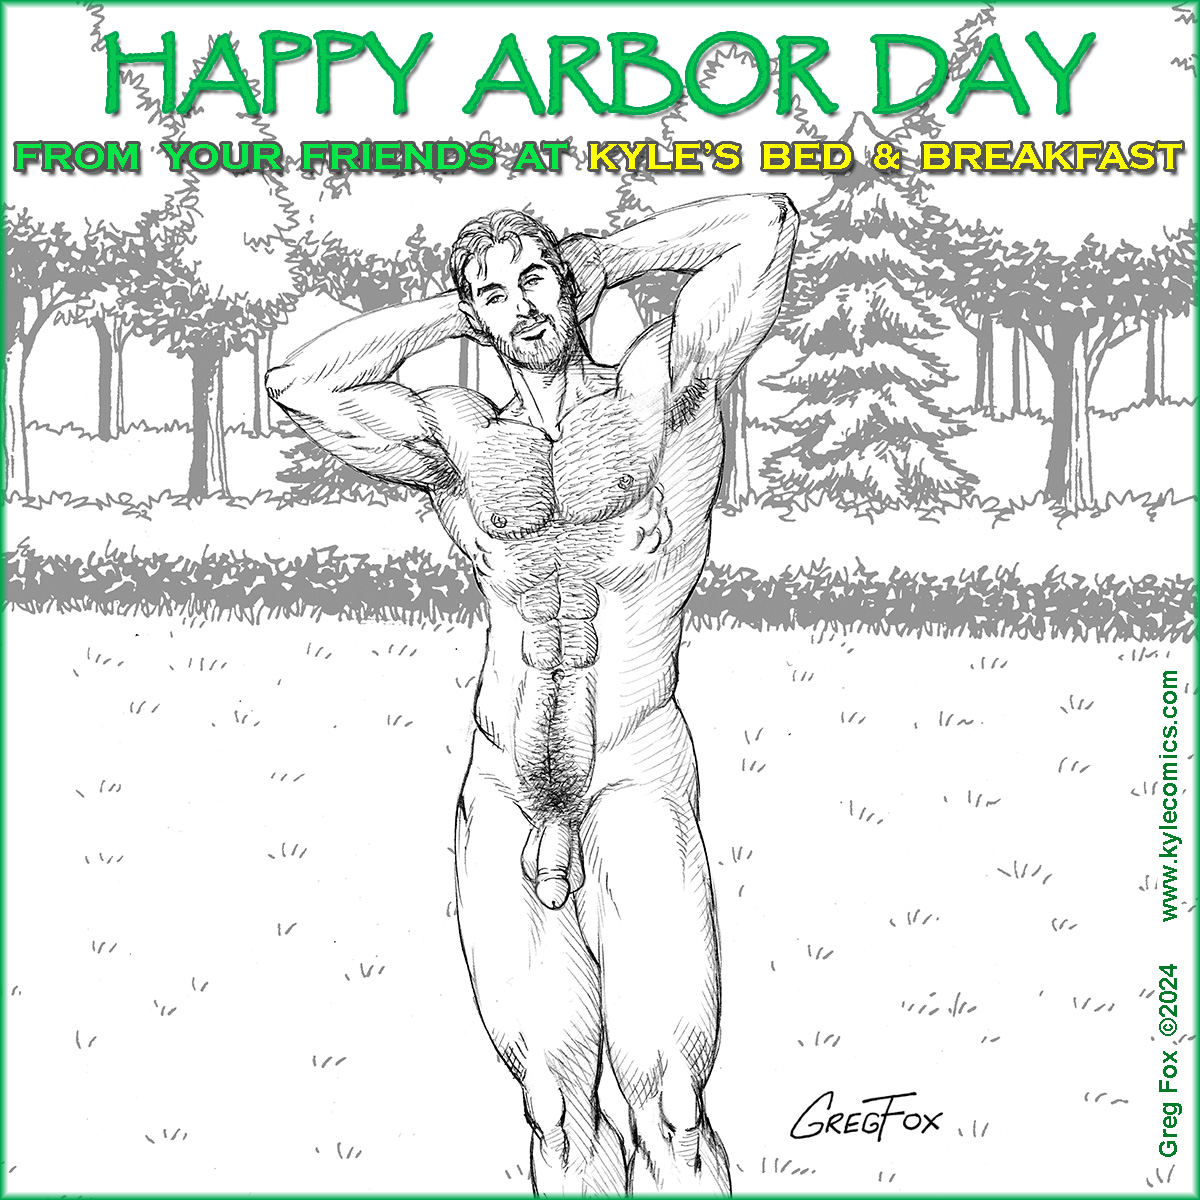 Happy Arbor Day, from Drew and all your friends at Kyle's B&B!!! 🌳 🌲🌳 🌲🌳 (Which do you prefer... with fig leaf, or without?). 🌳 🌲🌳 🌲🌳 #ArborDay #ArborDay2024 #KylesBnB #malefiguredrawing #figuredrawing #figleaf